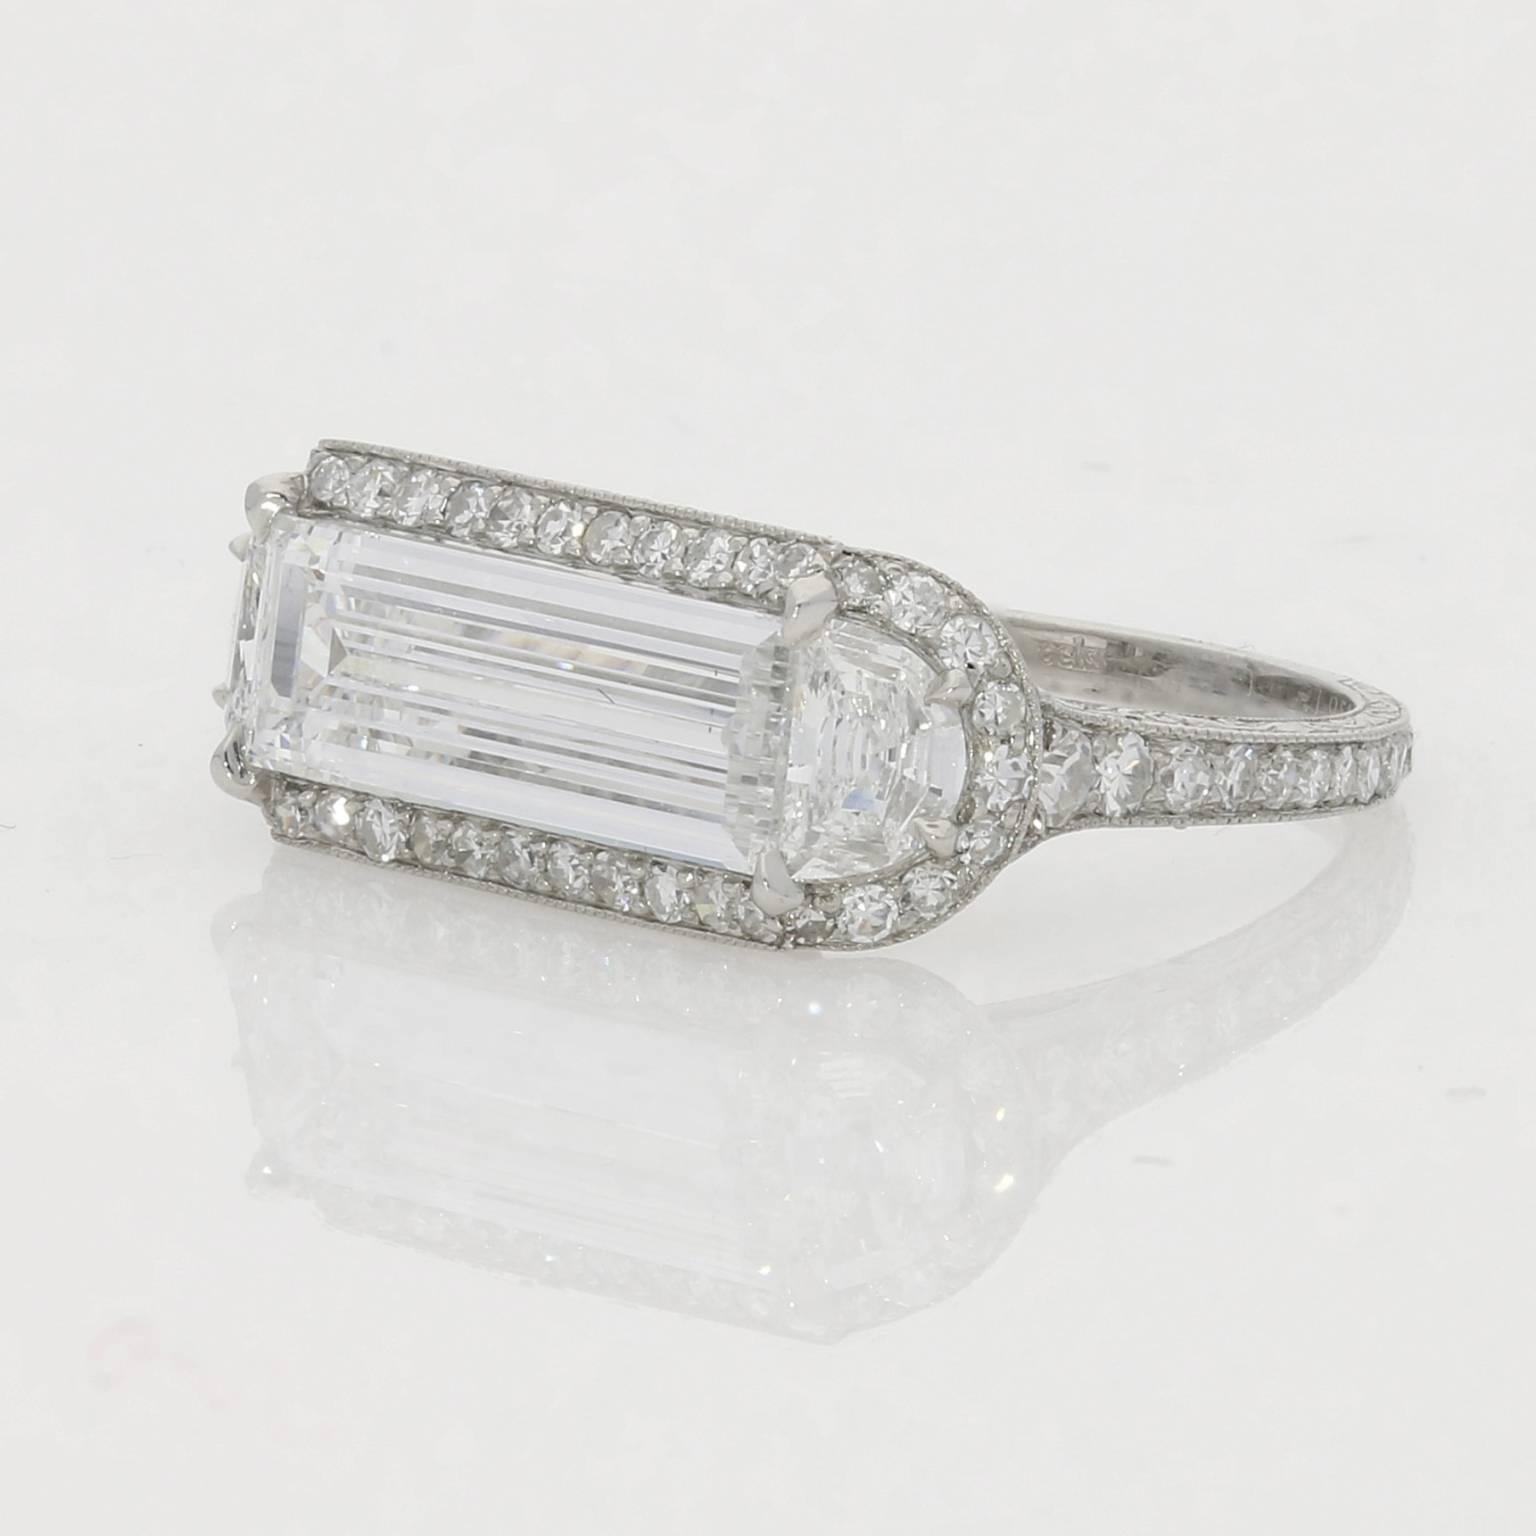  Unique ring set horizontally with a baguette-cut diamond between two demi-moon cut diamonds with a pavé diamond surround and shoulders in a finely engraved shank.

Hancocks

Contemporary

London

1.78ct D VS1 baguette-cut diamond